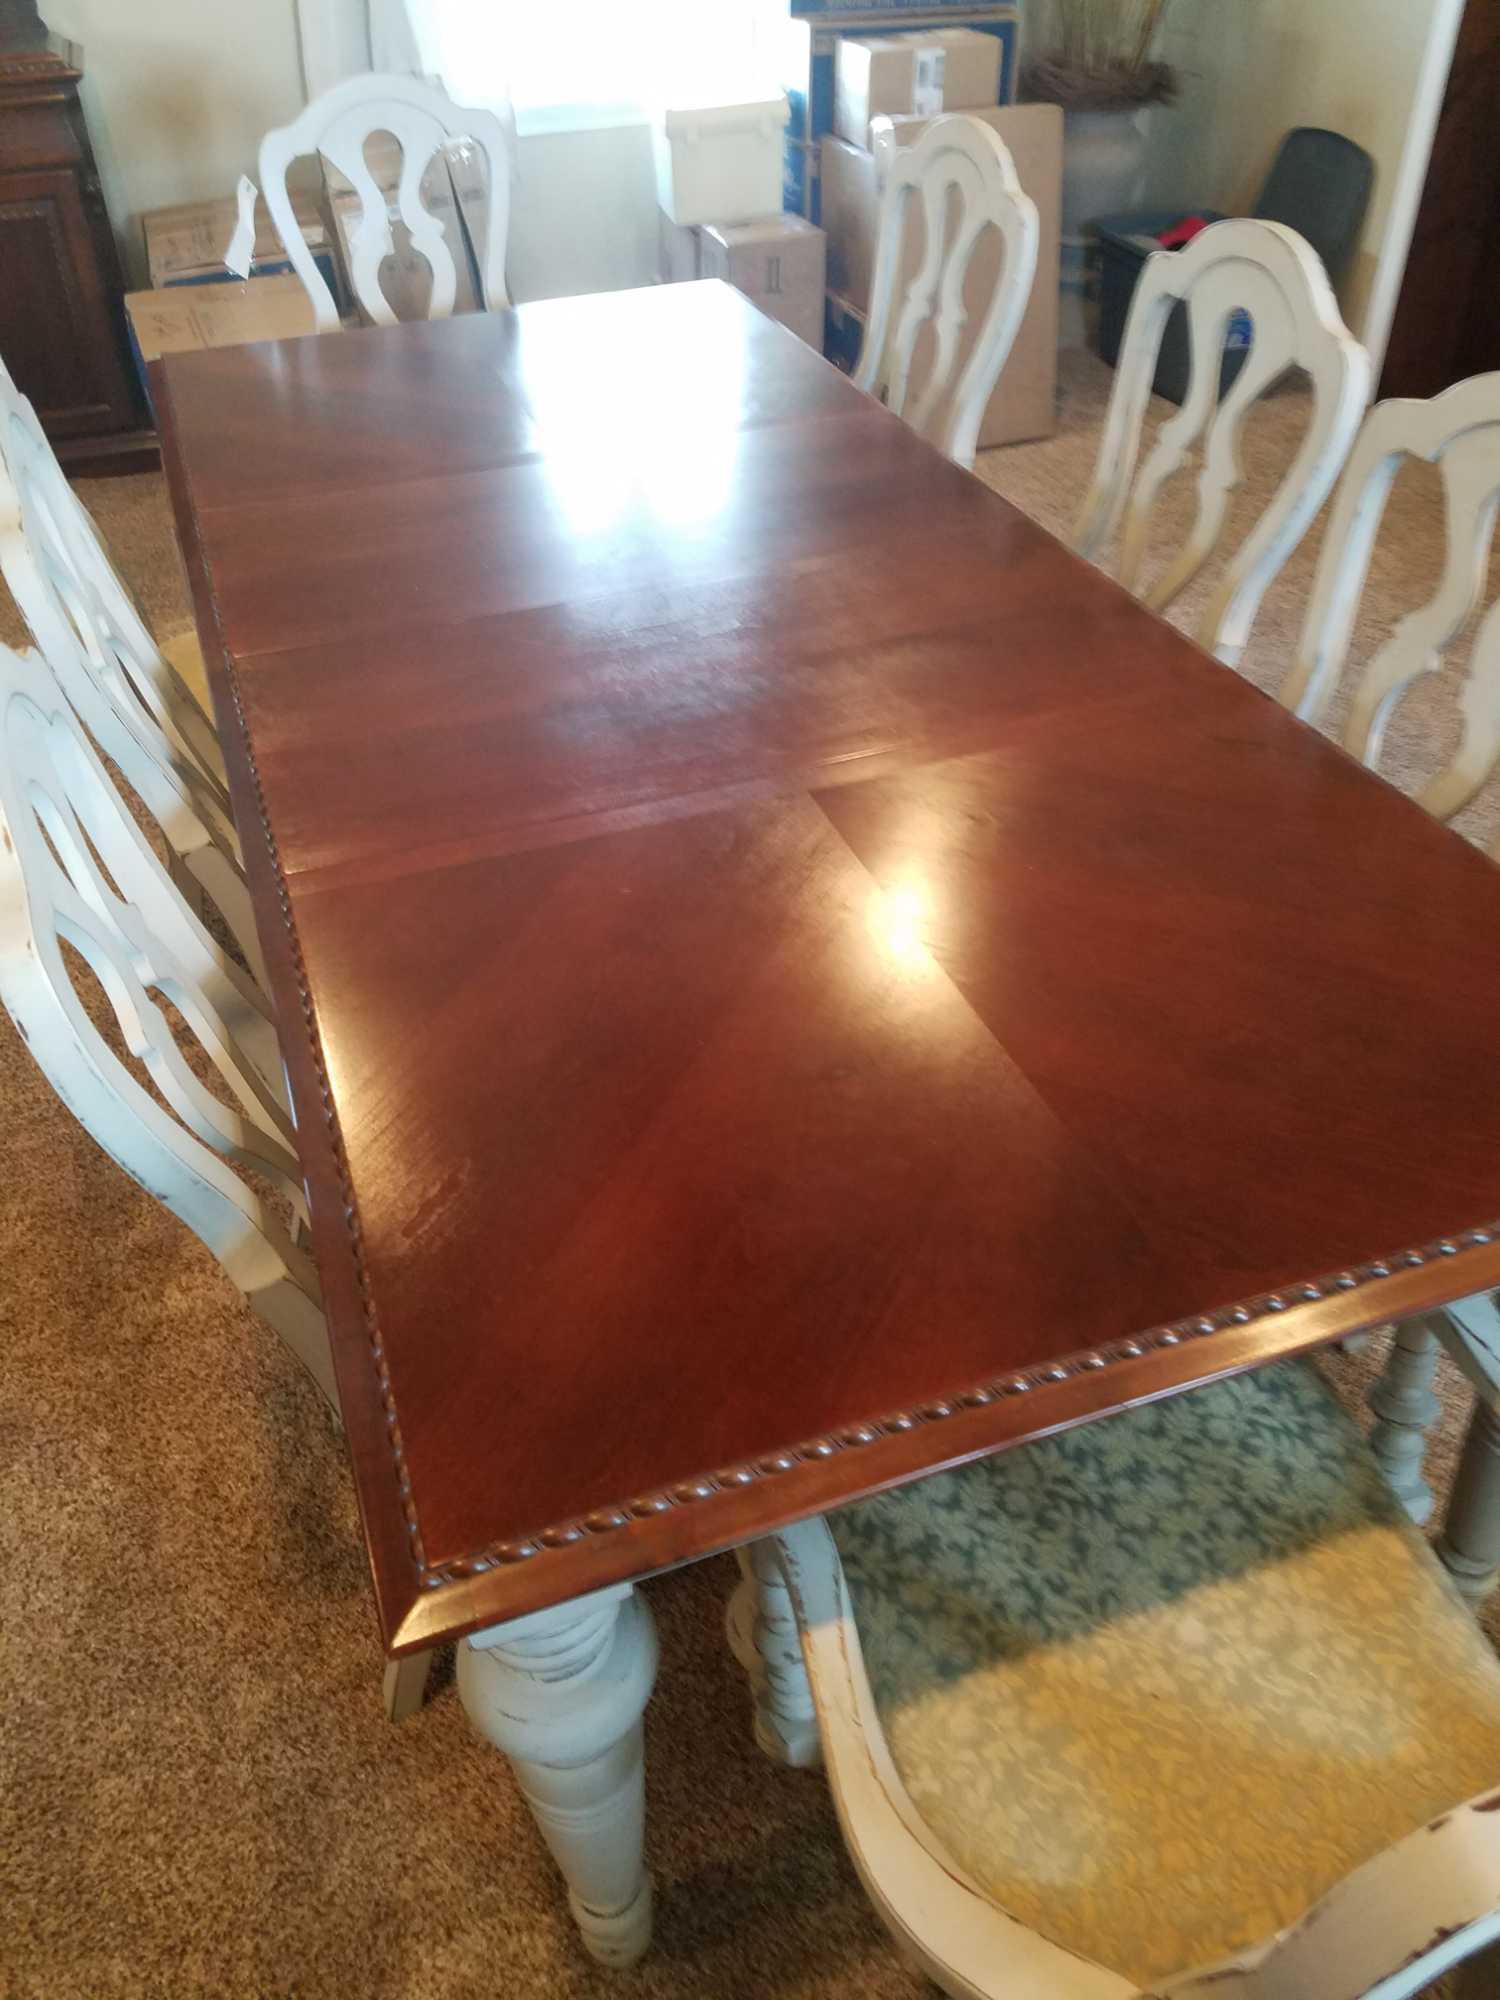 Broyhill dining room table with 8 chairs and 2 leaves